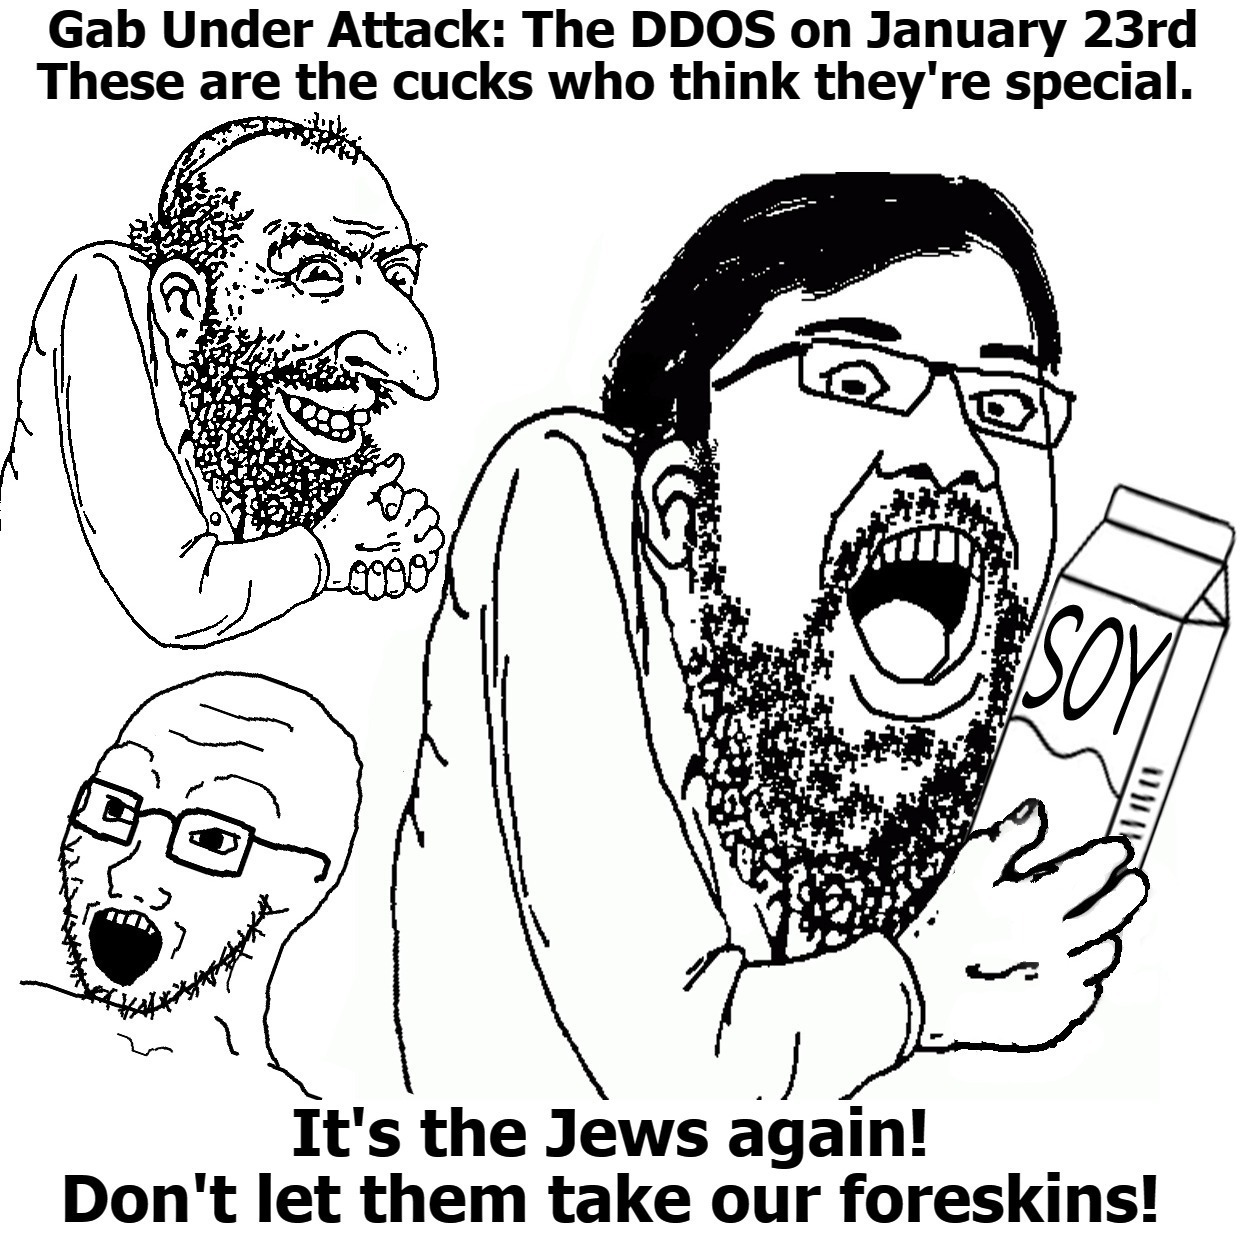 Don't let them take our foreskins! | image tagged in gab ddos attack,soyboy vs yes chad,soyboys,cucks,cuckholds,jews | made w/ Imgflip meme maker